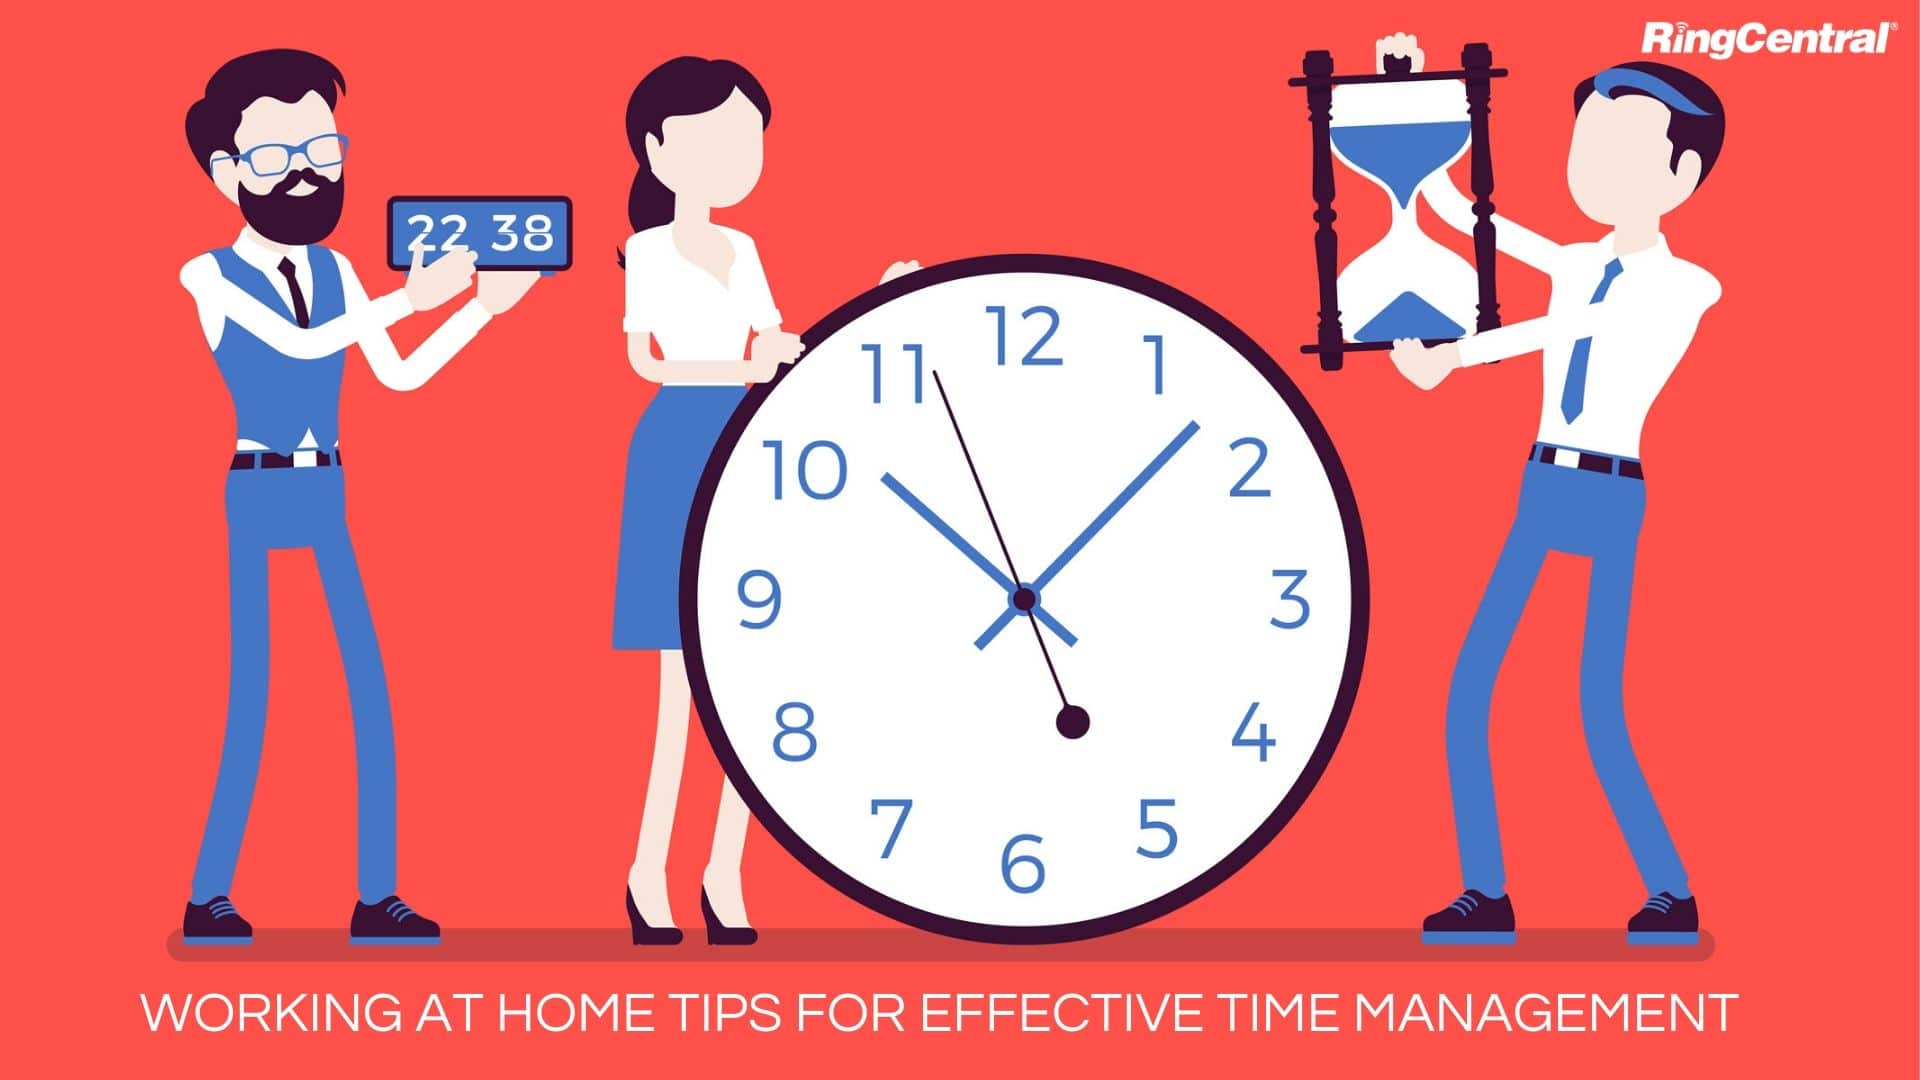 Working at home tips for effective time management